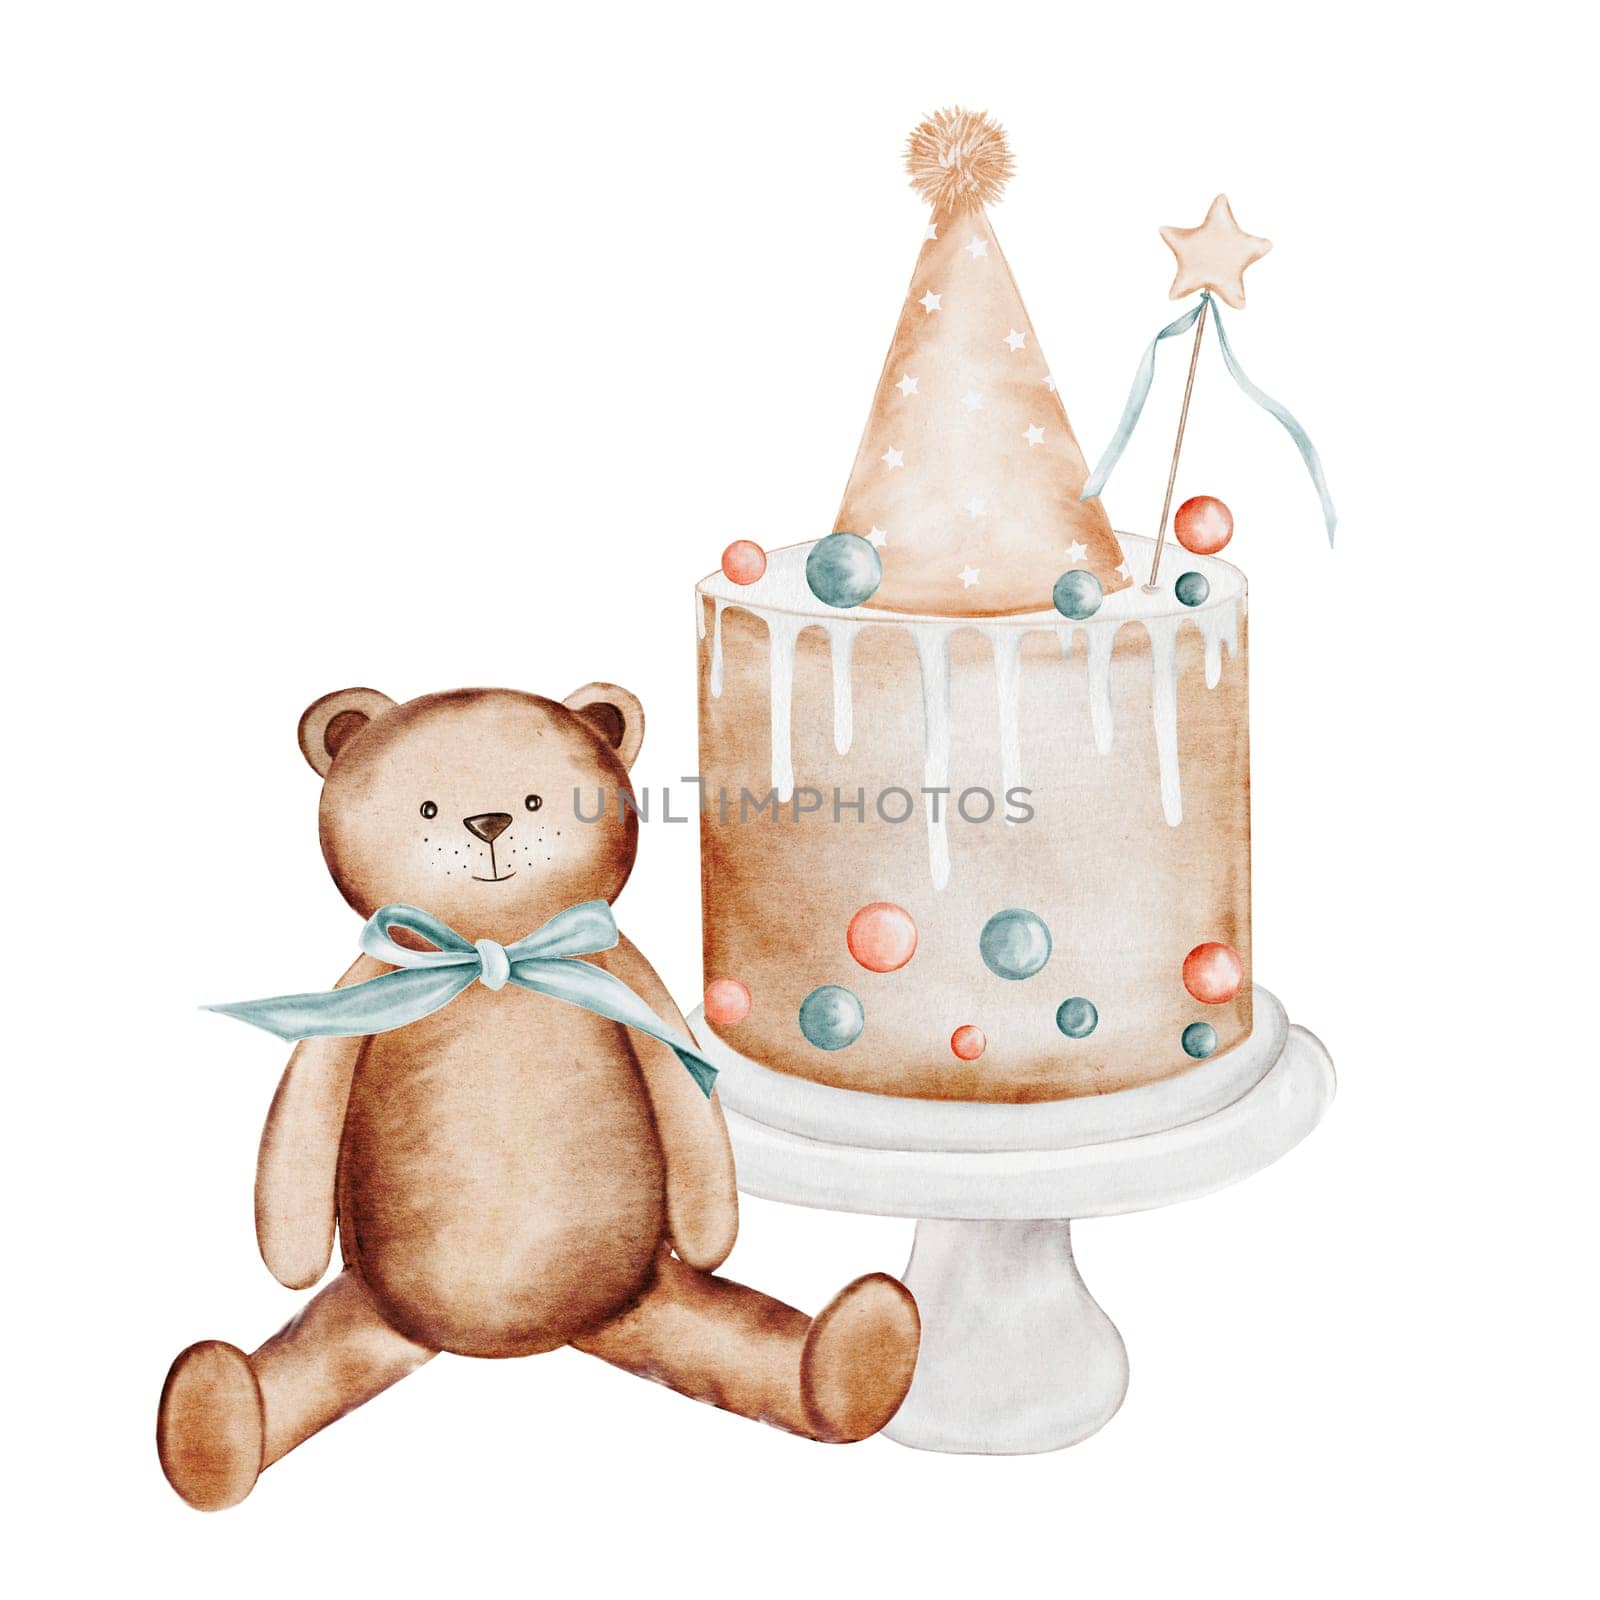 Watercolor birthday drawing. Cute card with cake and teddy bear isolated on white background. Clip art with neutral pastel colors handmade. Ideal for cards and invitations to celebrities and baby showers by TatyanaTrushcheleva